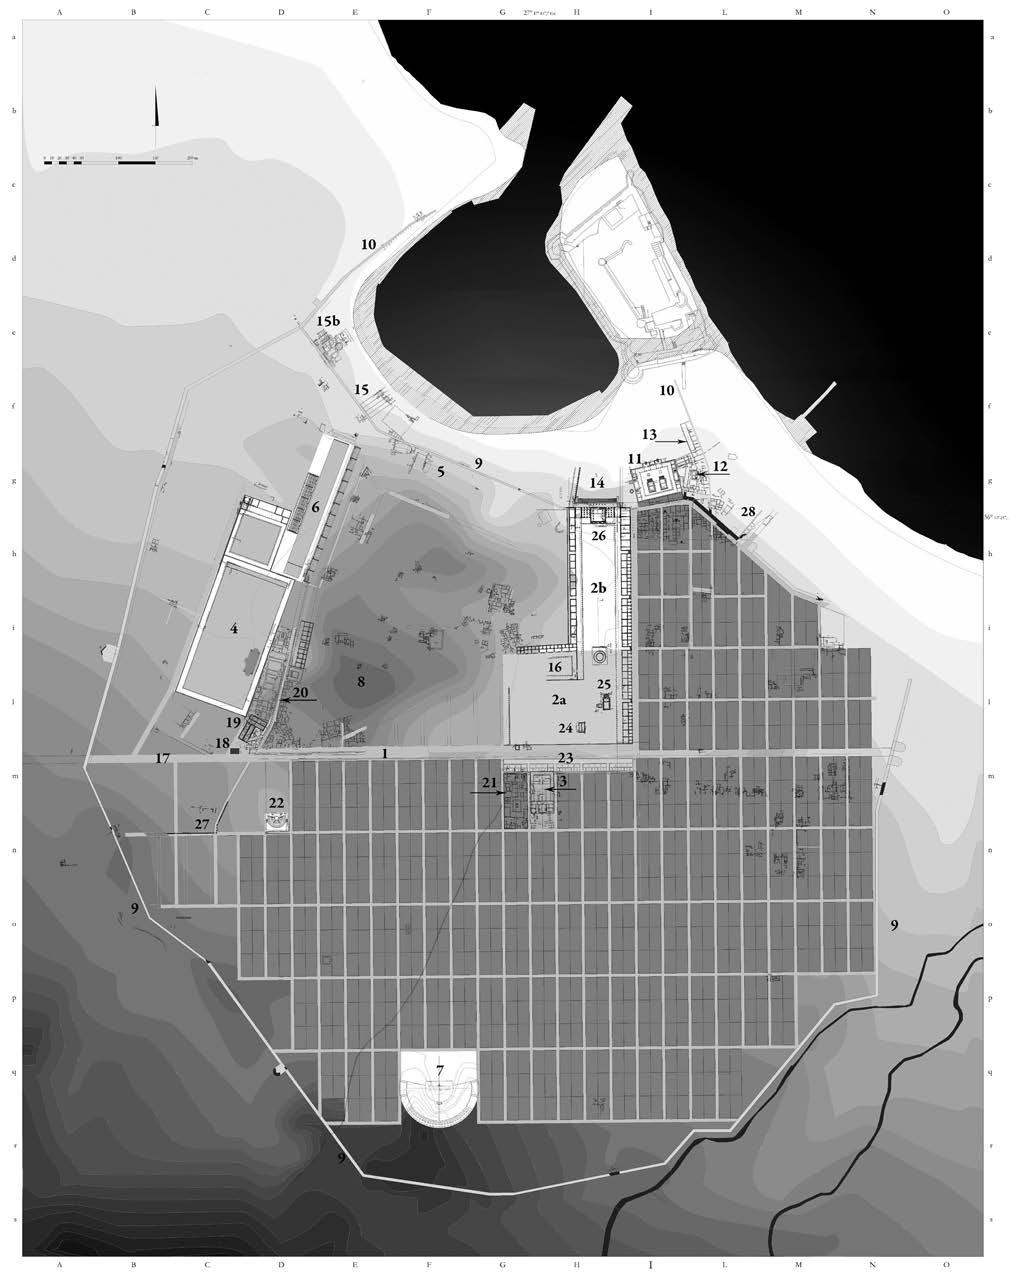 Fig. 2. Kos, general map of the ancient town (from Livadiotti, Rocco 2011, fig. 1): 1. plateia/decumanus; 2. agora, divided into a) original south agora and b) northern added agora; 3.